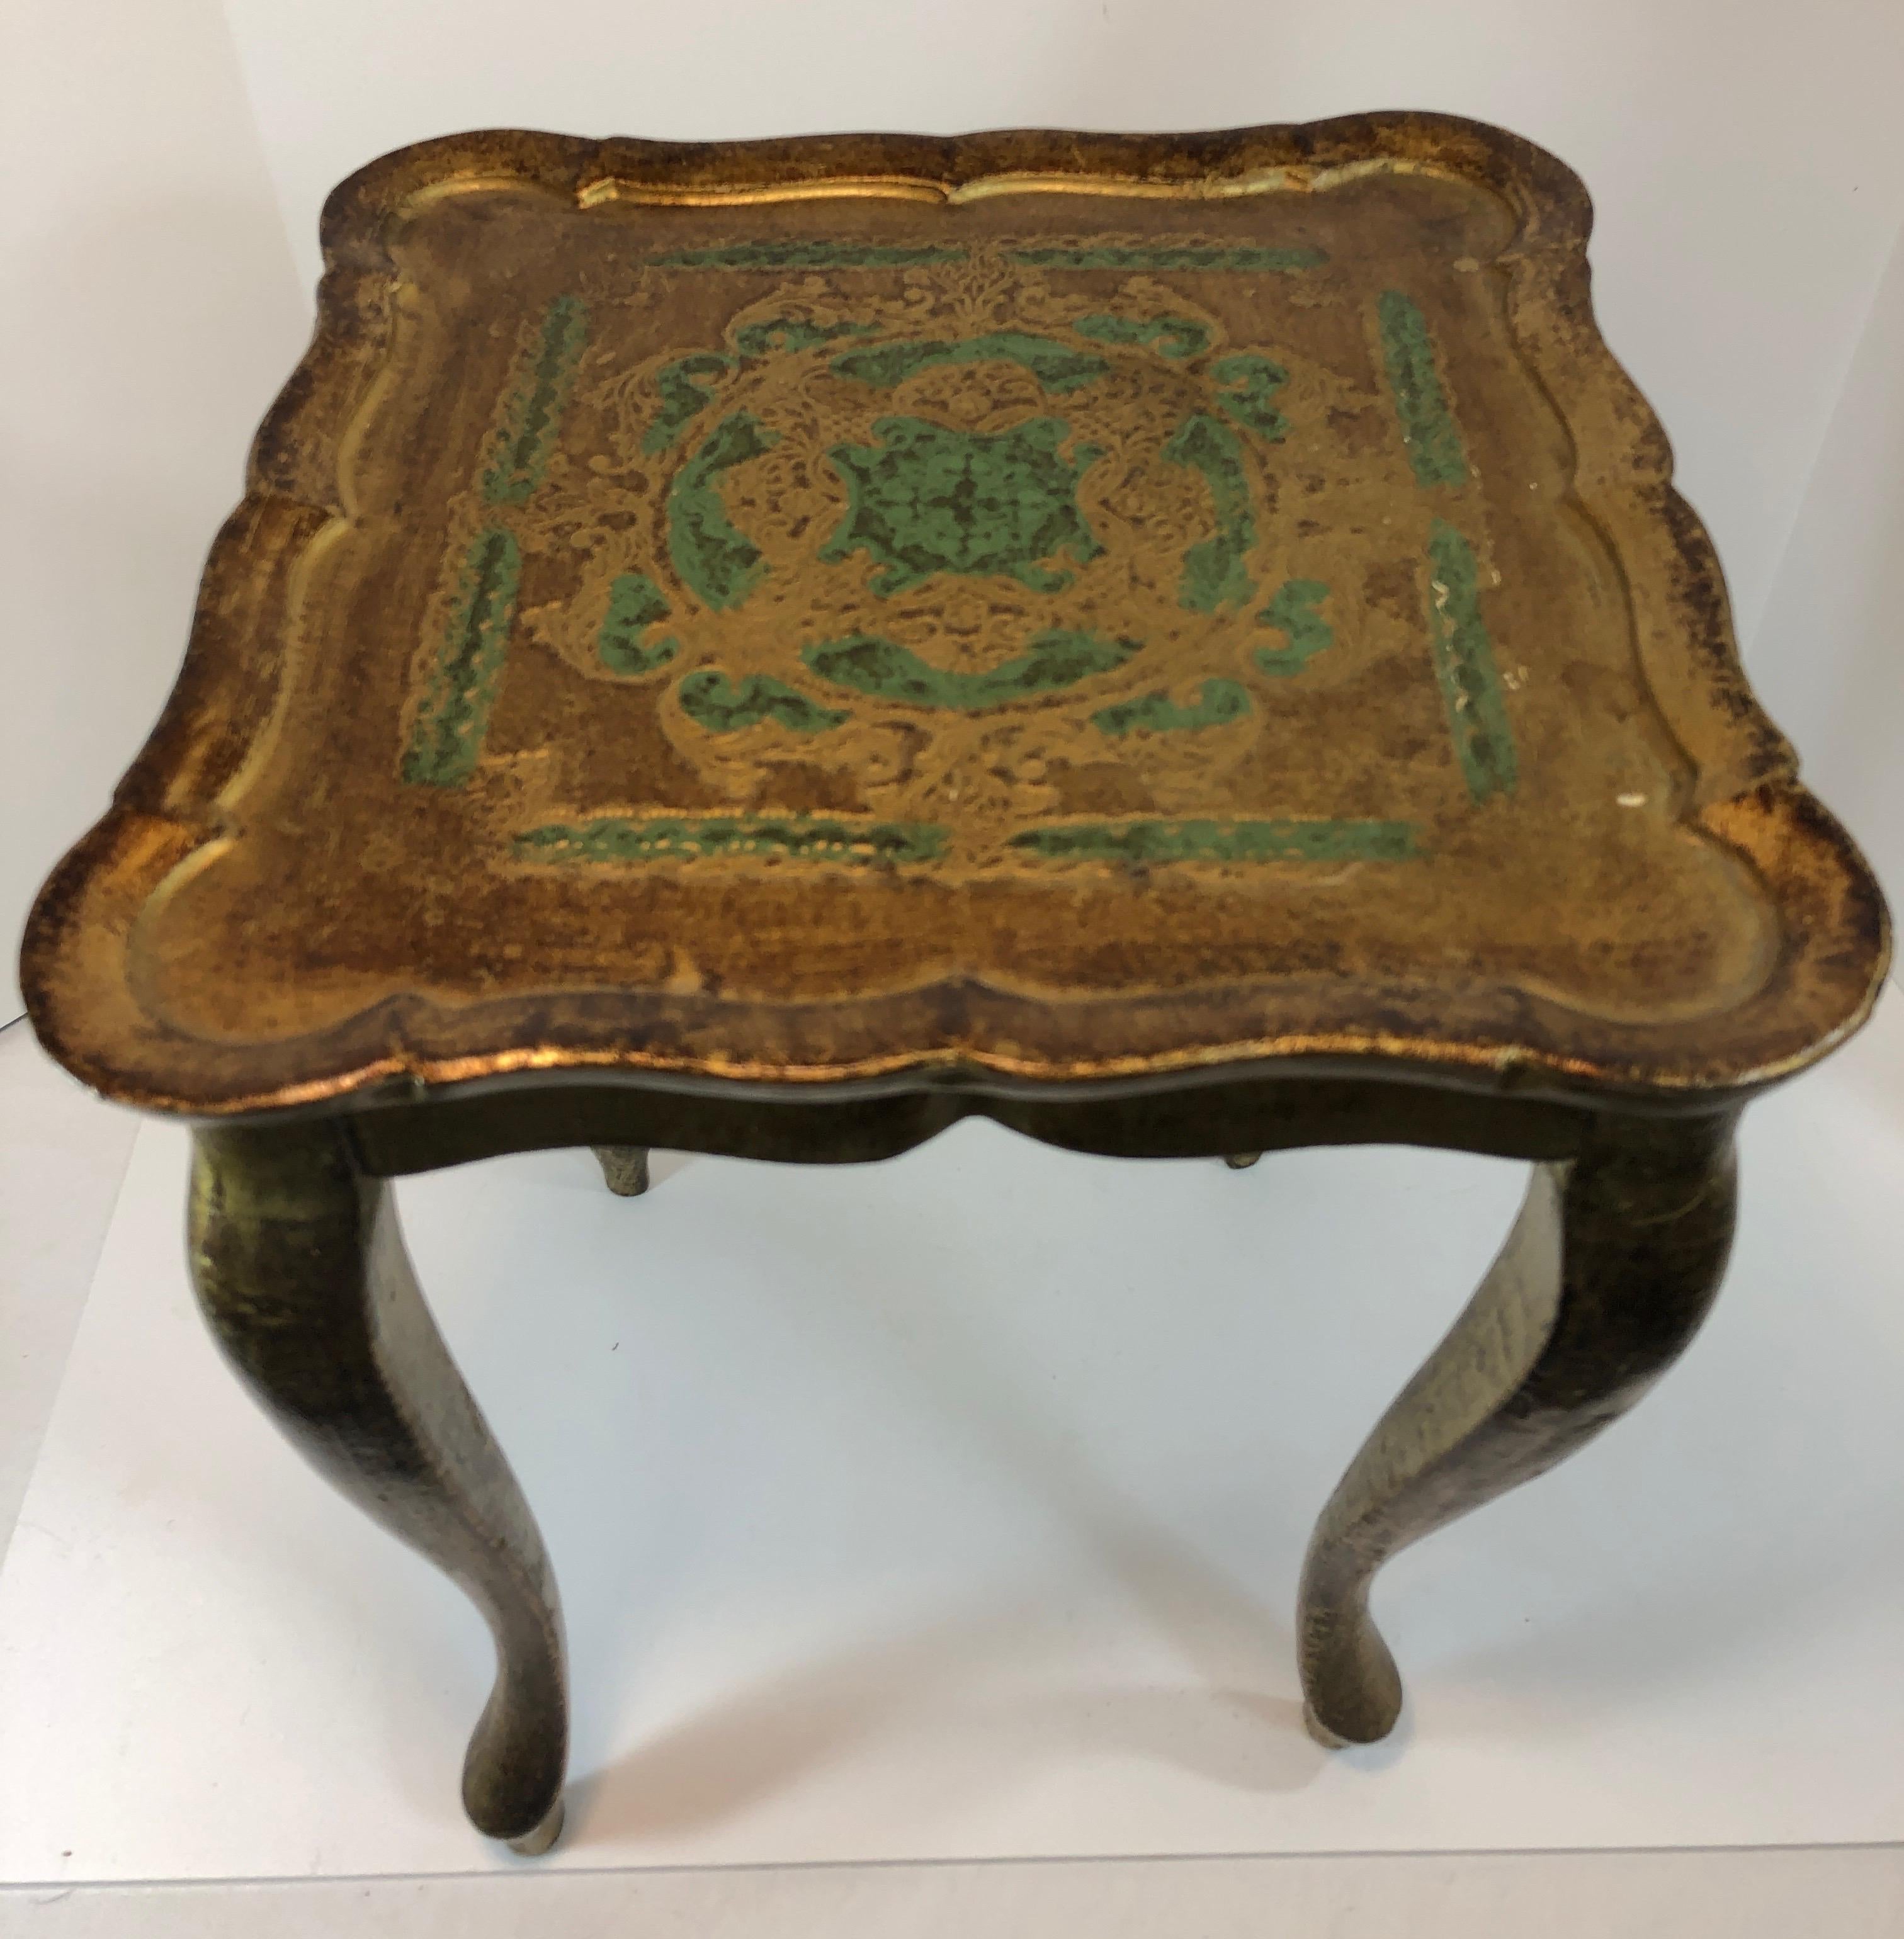 Florentine side table with gold and green gilt finish. Good overall condition, minor wear due to age and use.